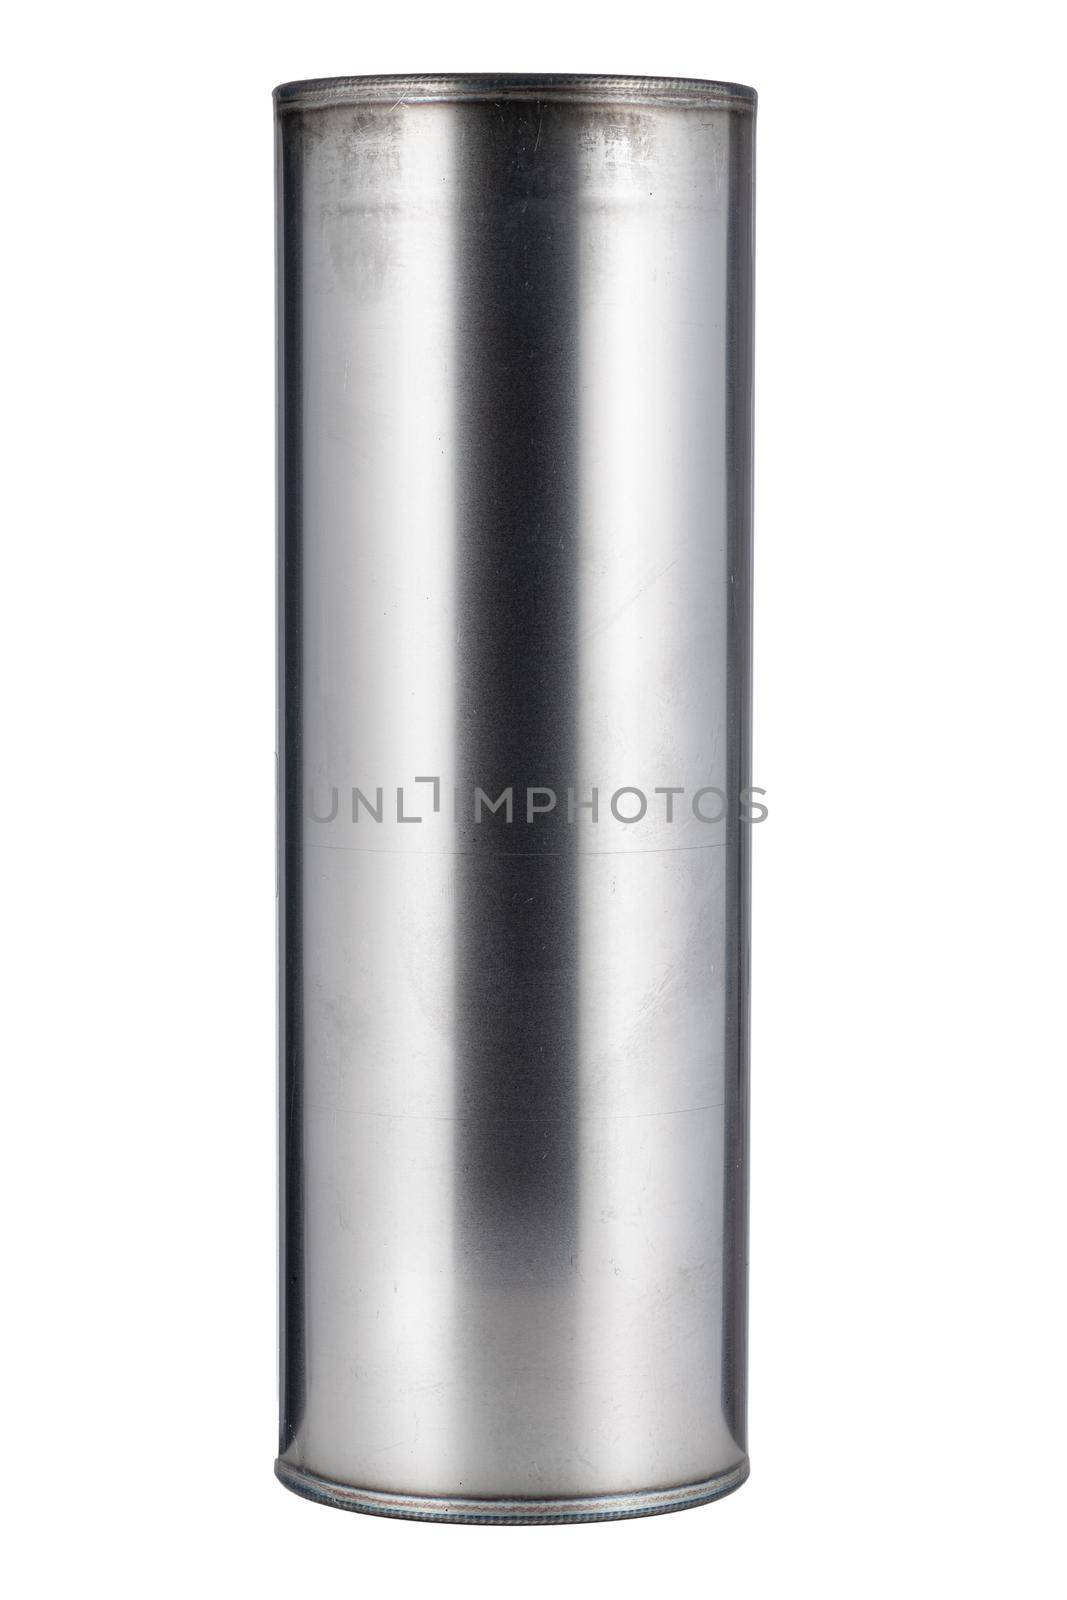 Exhaust system of the car on a white background. Close up.